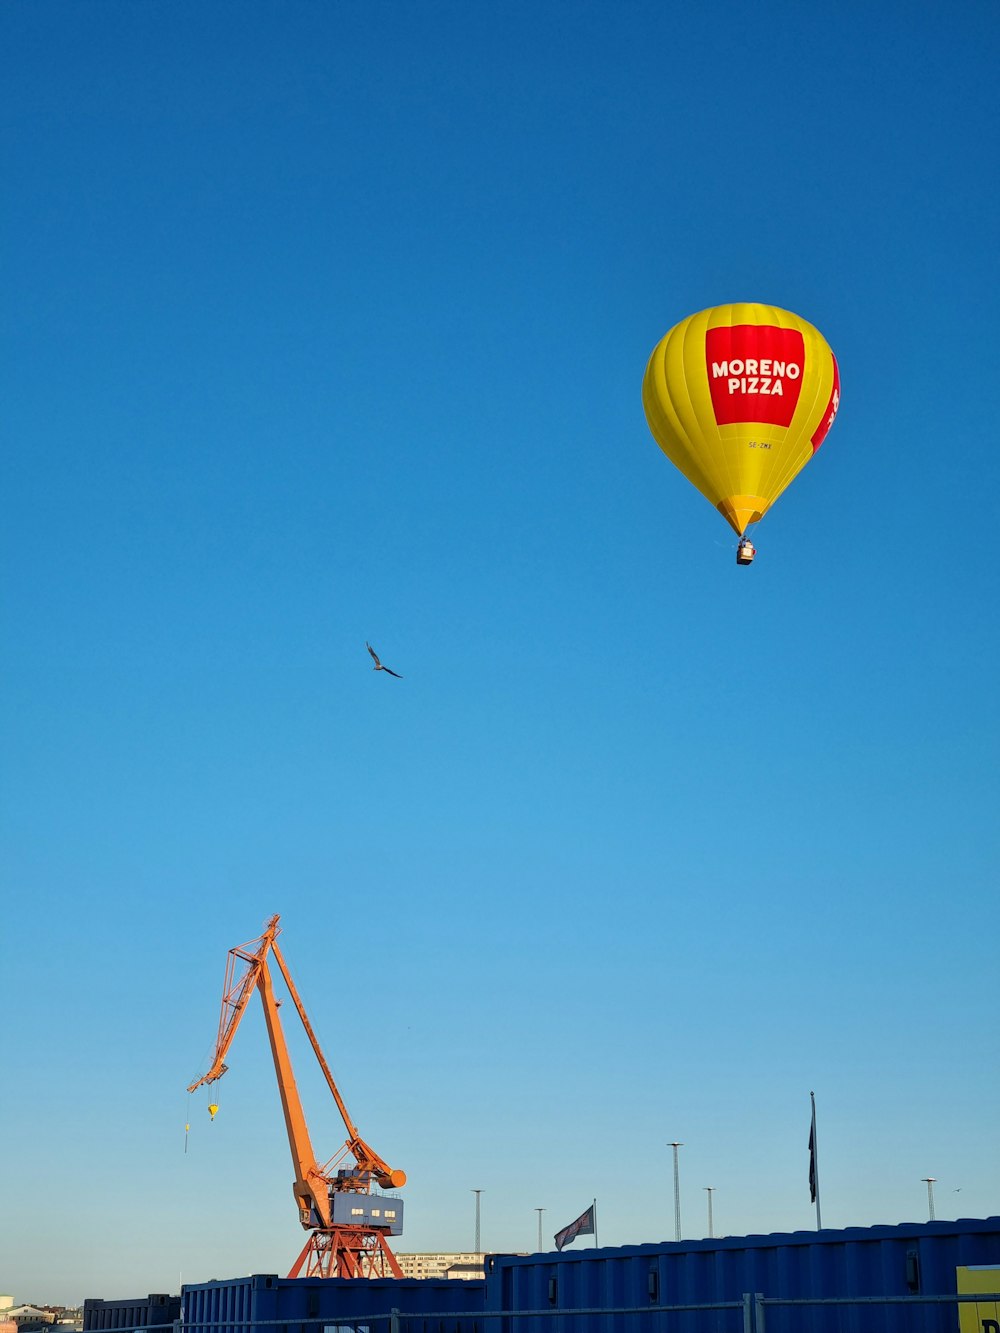 a yellow and red hot air balloon flying over a building